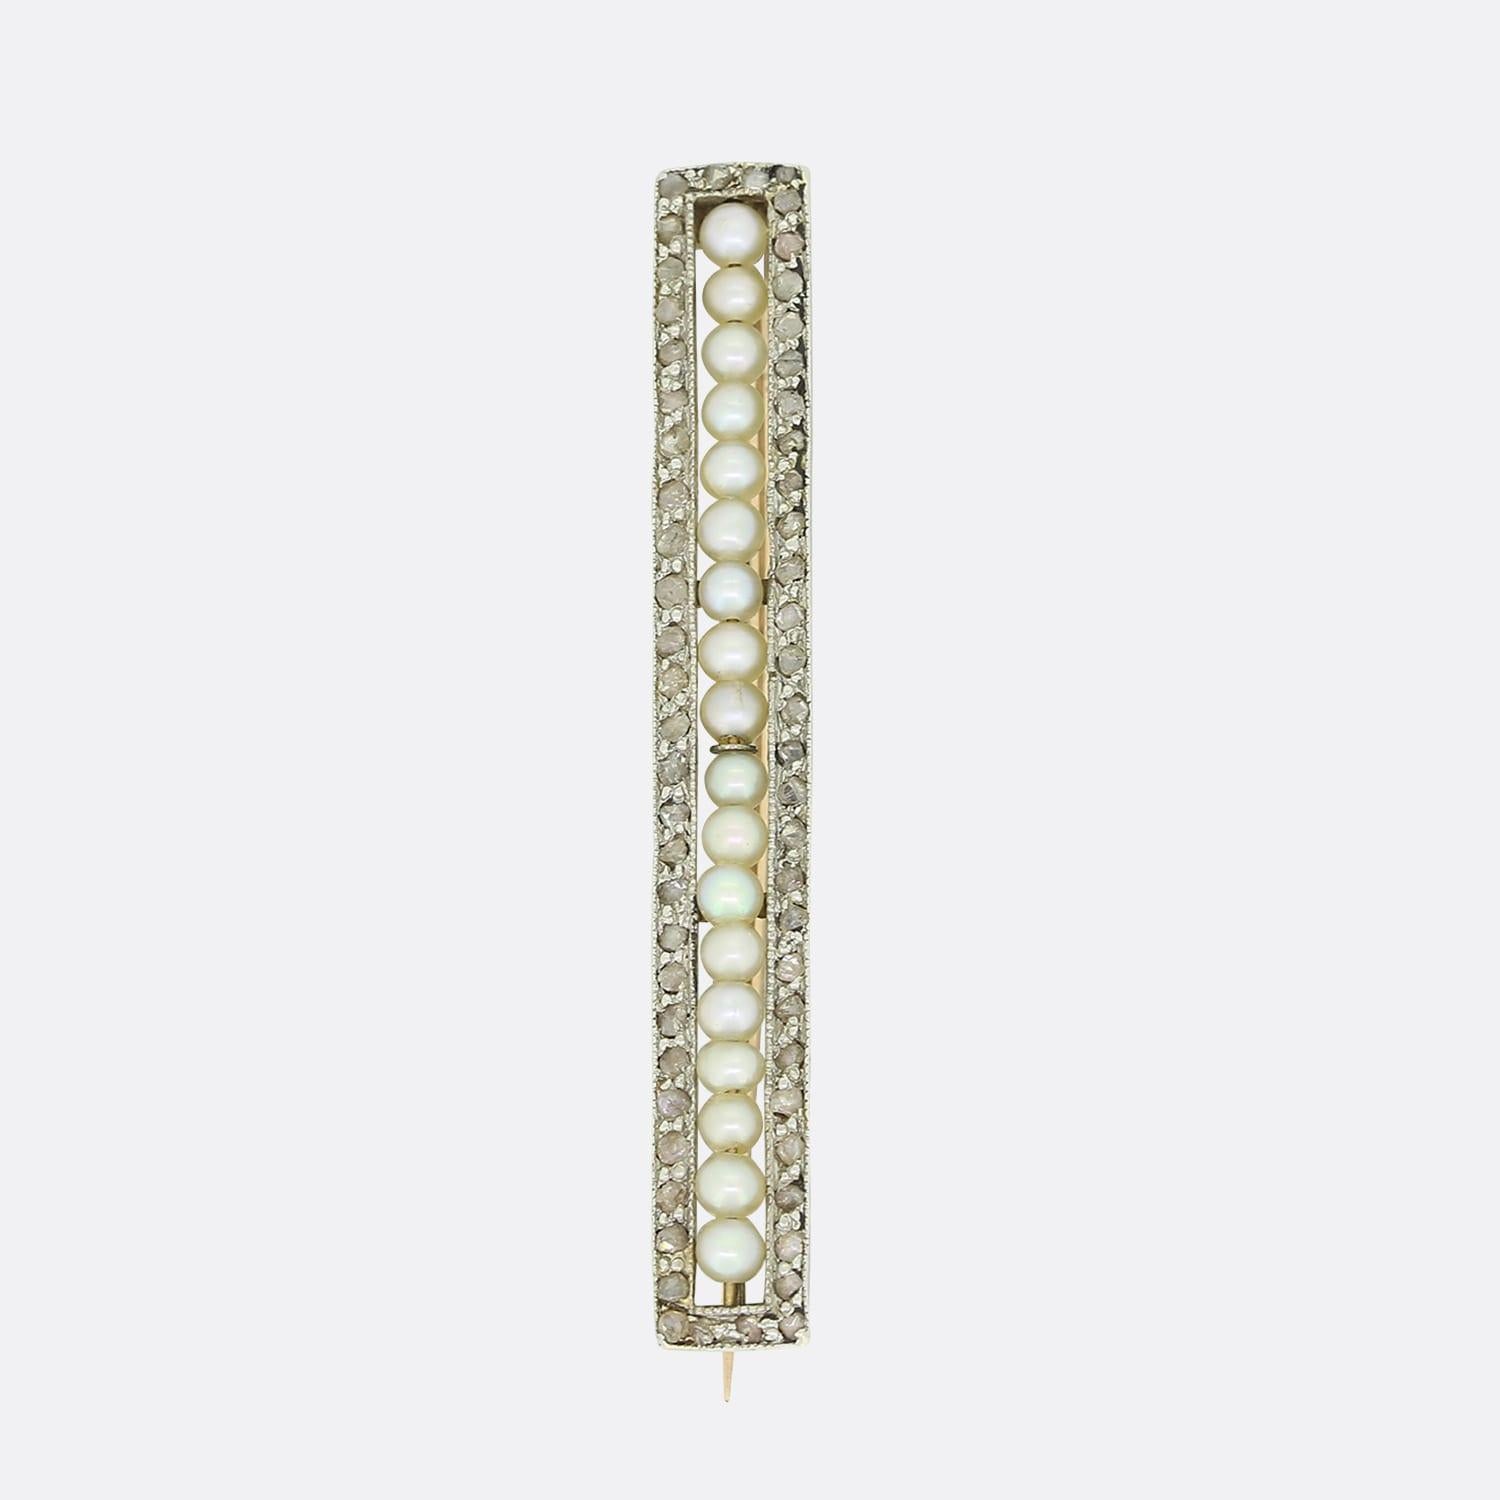 This is an 18ct gold and platinum bar brooch from the Edwardian era. The brooch is set with nineteen natural seed pearls and surrounded by a cluster of rose cut diamonds and crafted in 18ct yellow gold and platinum. 

Condition: Used (Very